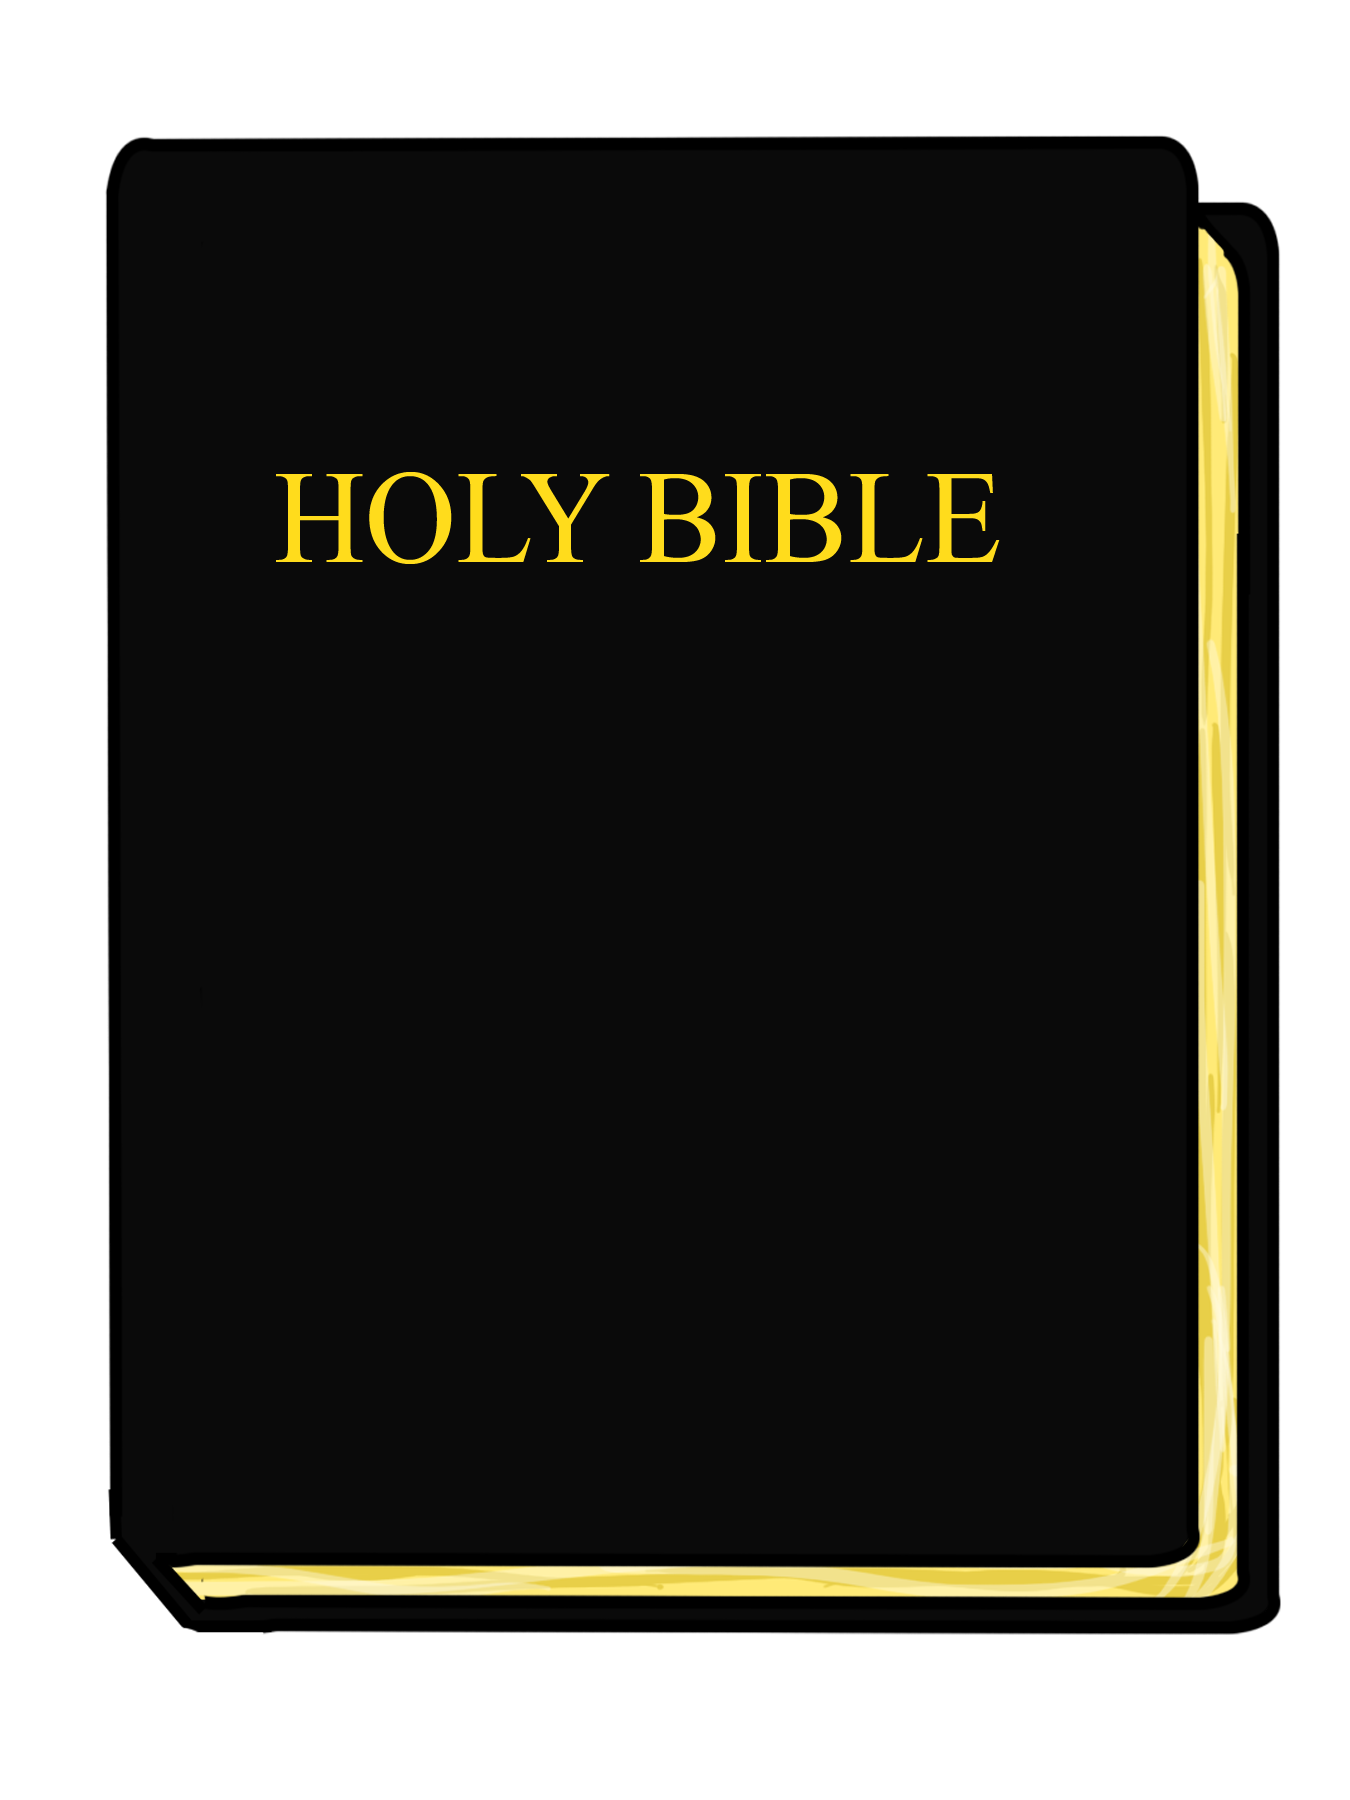 Clipartlord Com Exclusive This Holy Bible Clip Art Is Perfect For Use